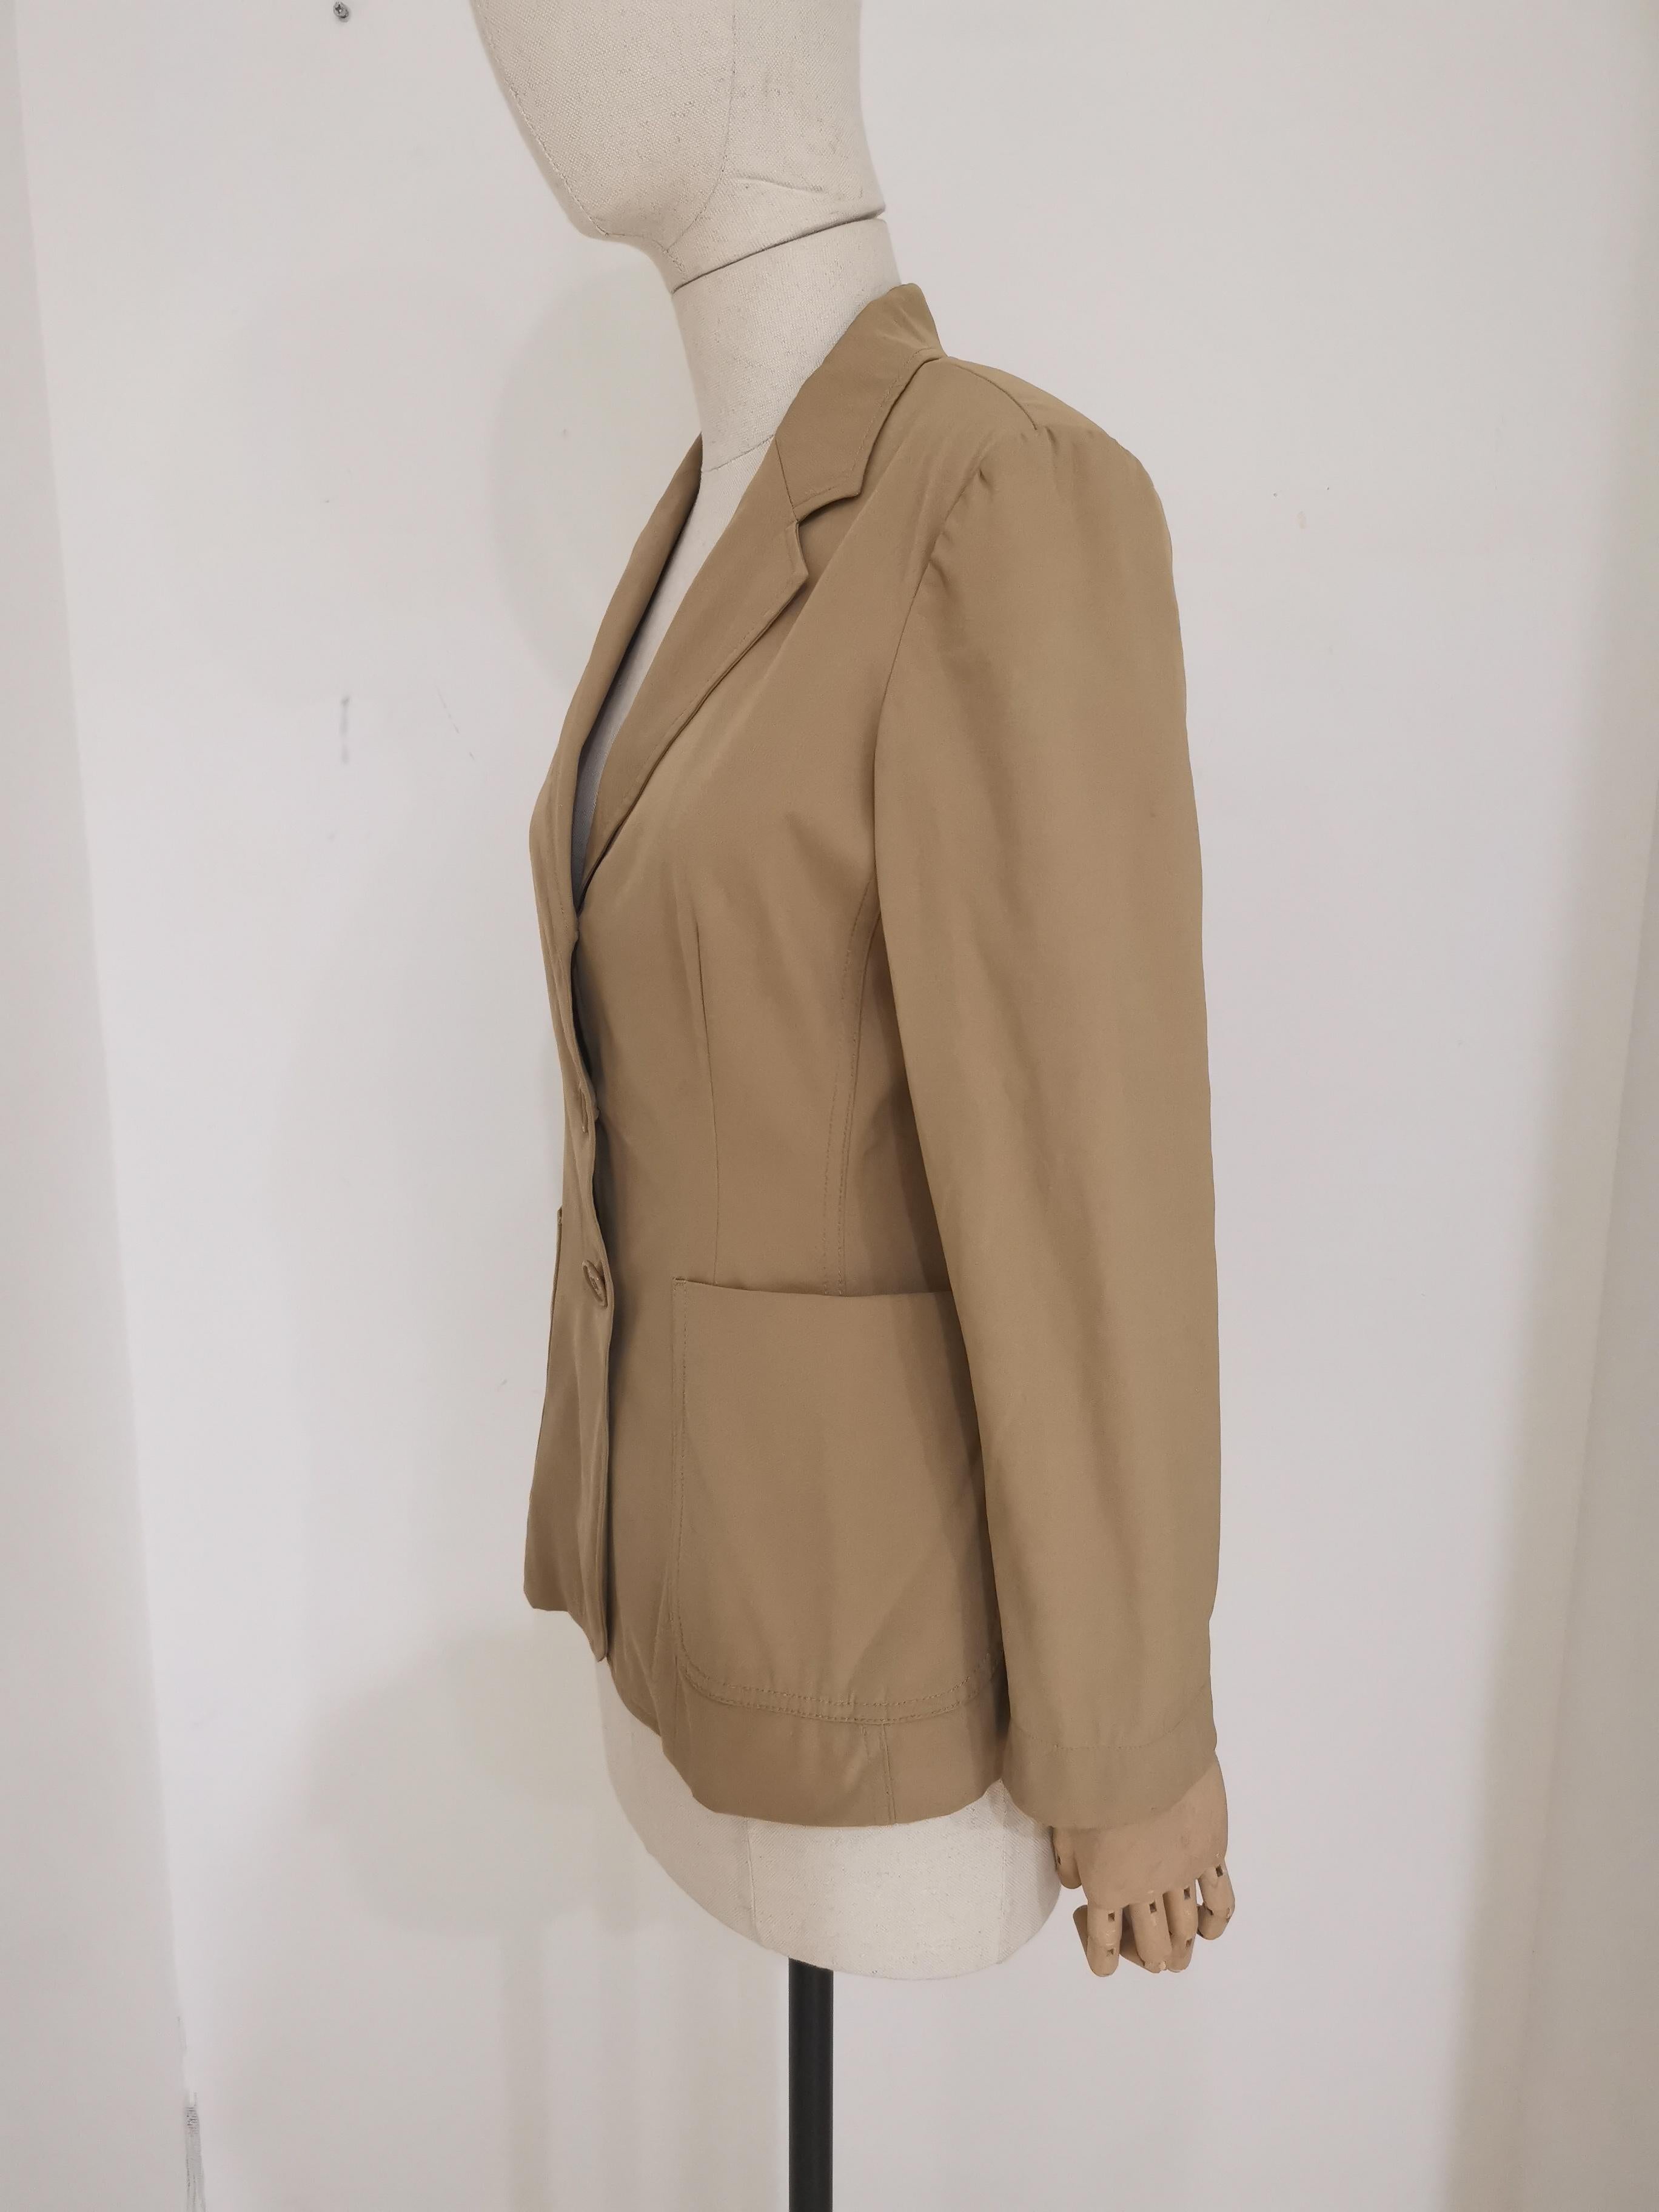 Moschino beige jacket In Good Condition For Sale In Capri, IT